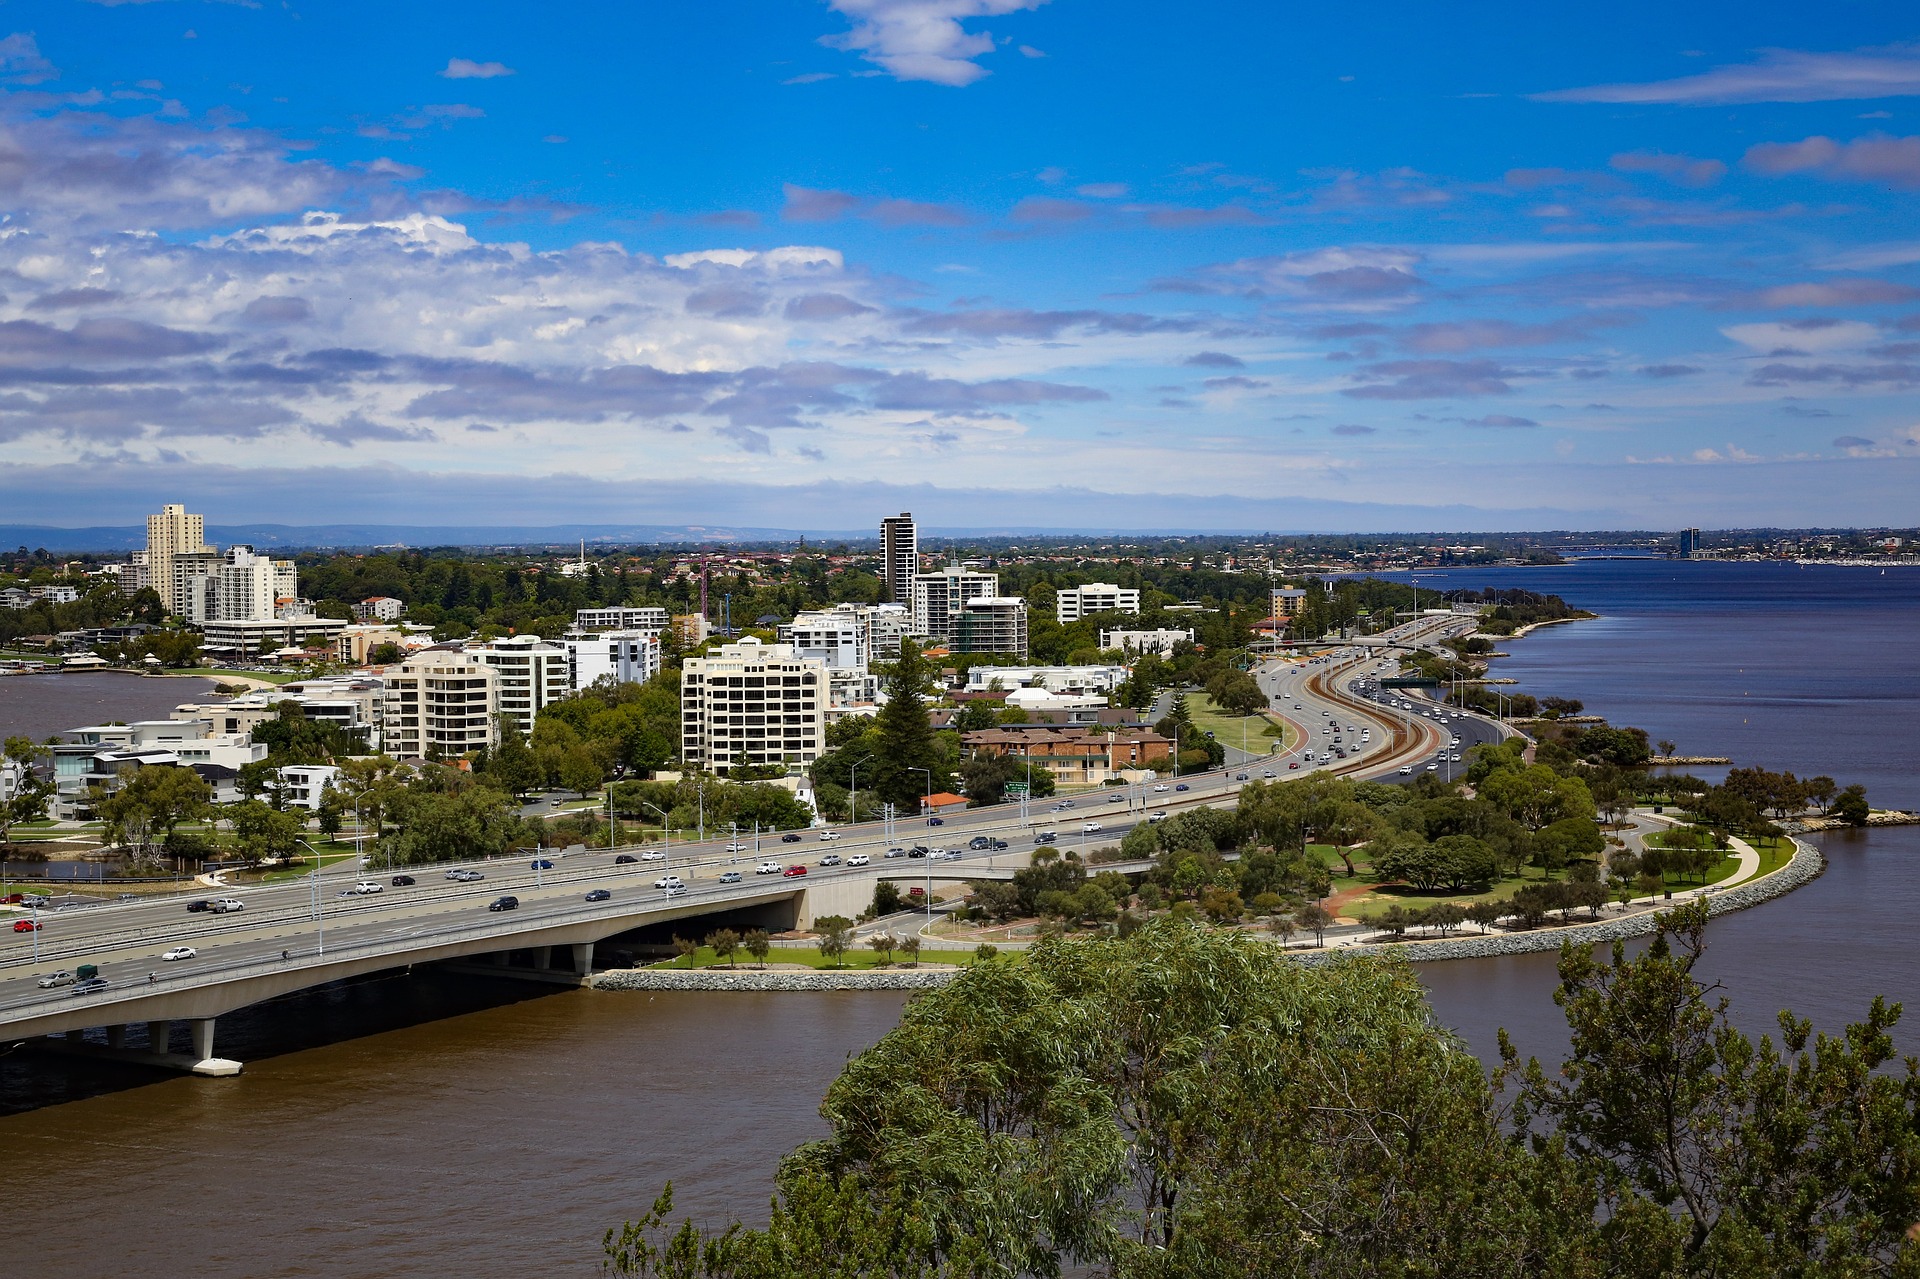 Project Identifying Best Pavement Practices perth 2082263 1920 Identifying Best Pavement Practice for Major Projects 1